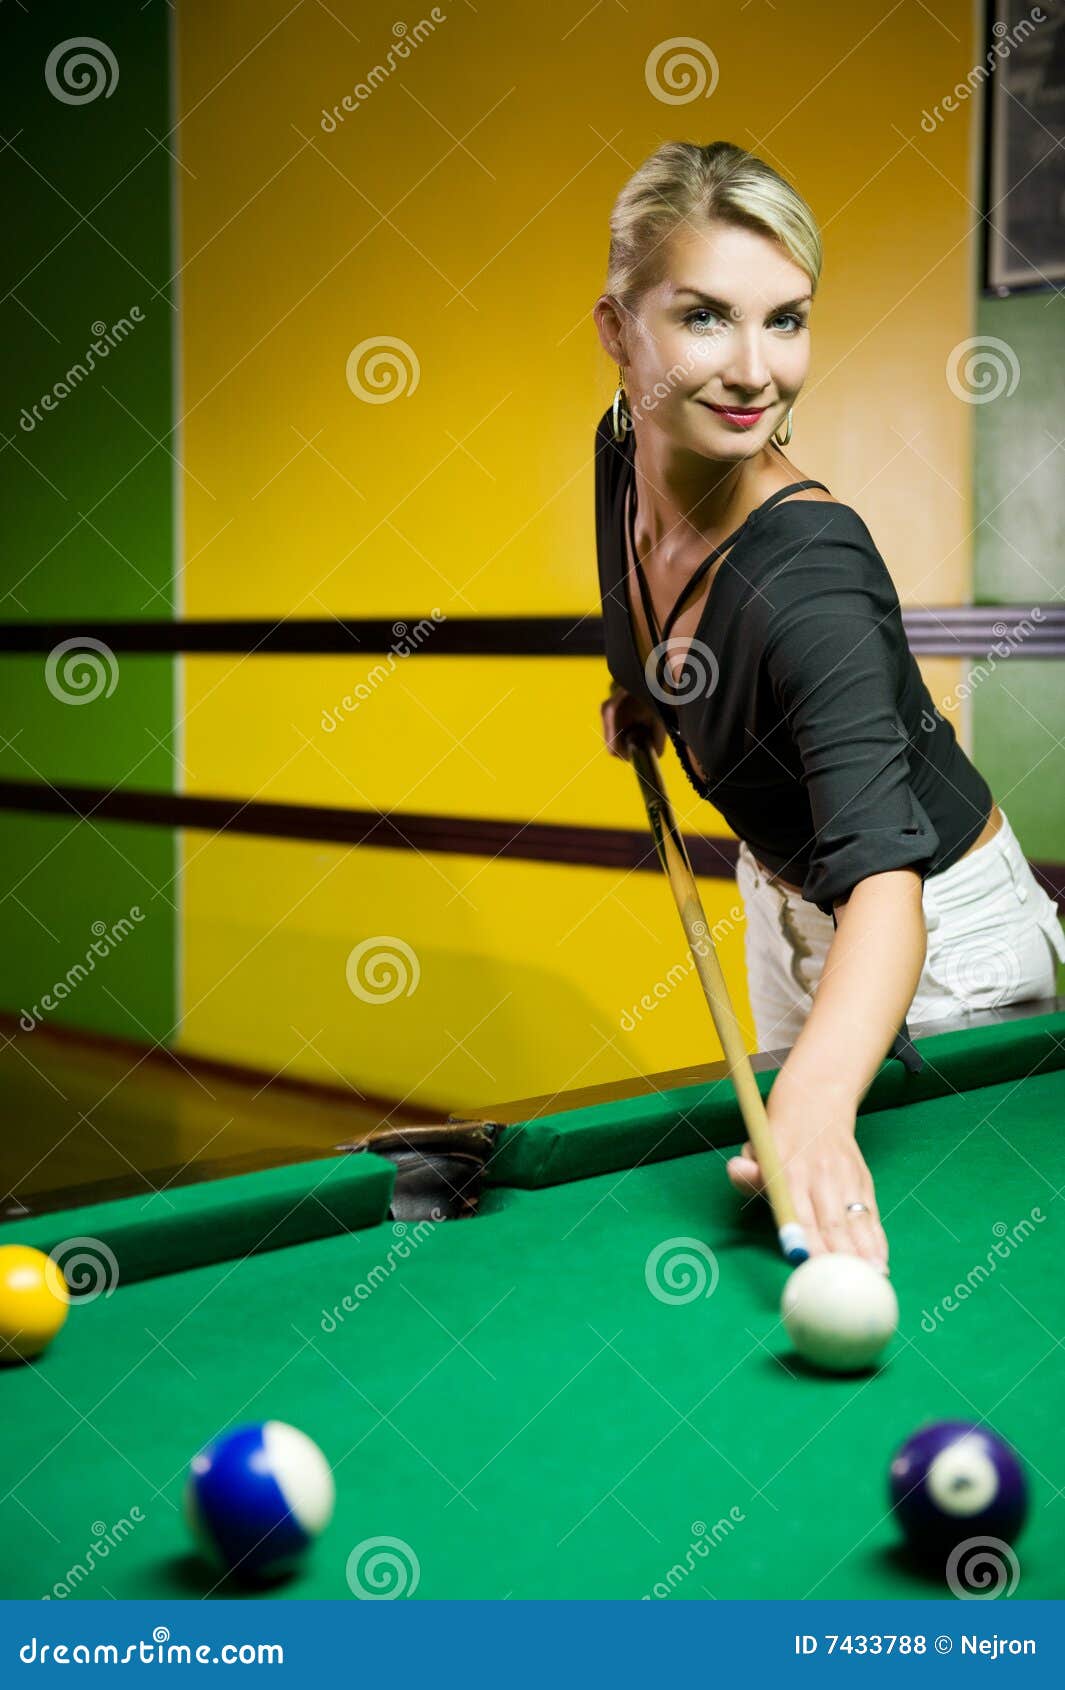 Woman playing billiards stock photo. Image of indoors 